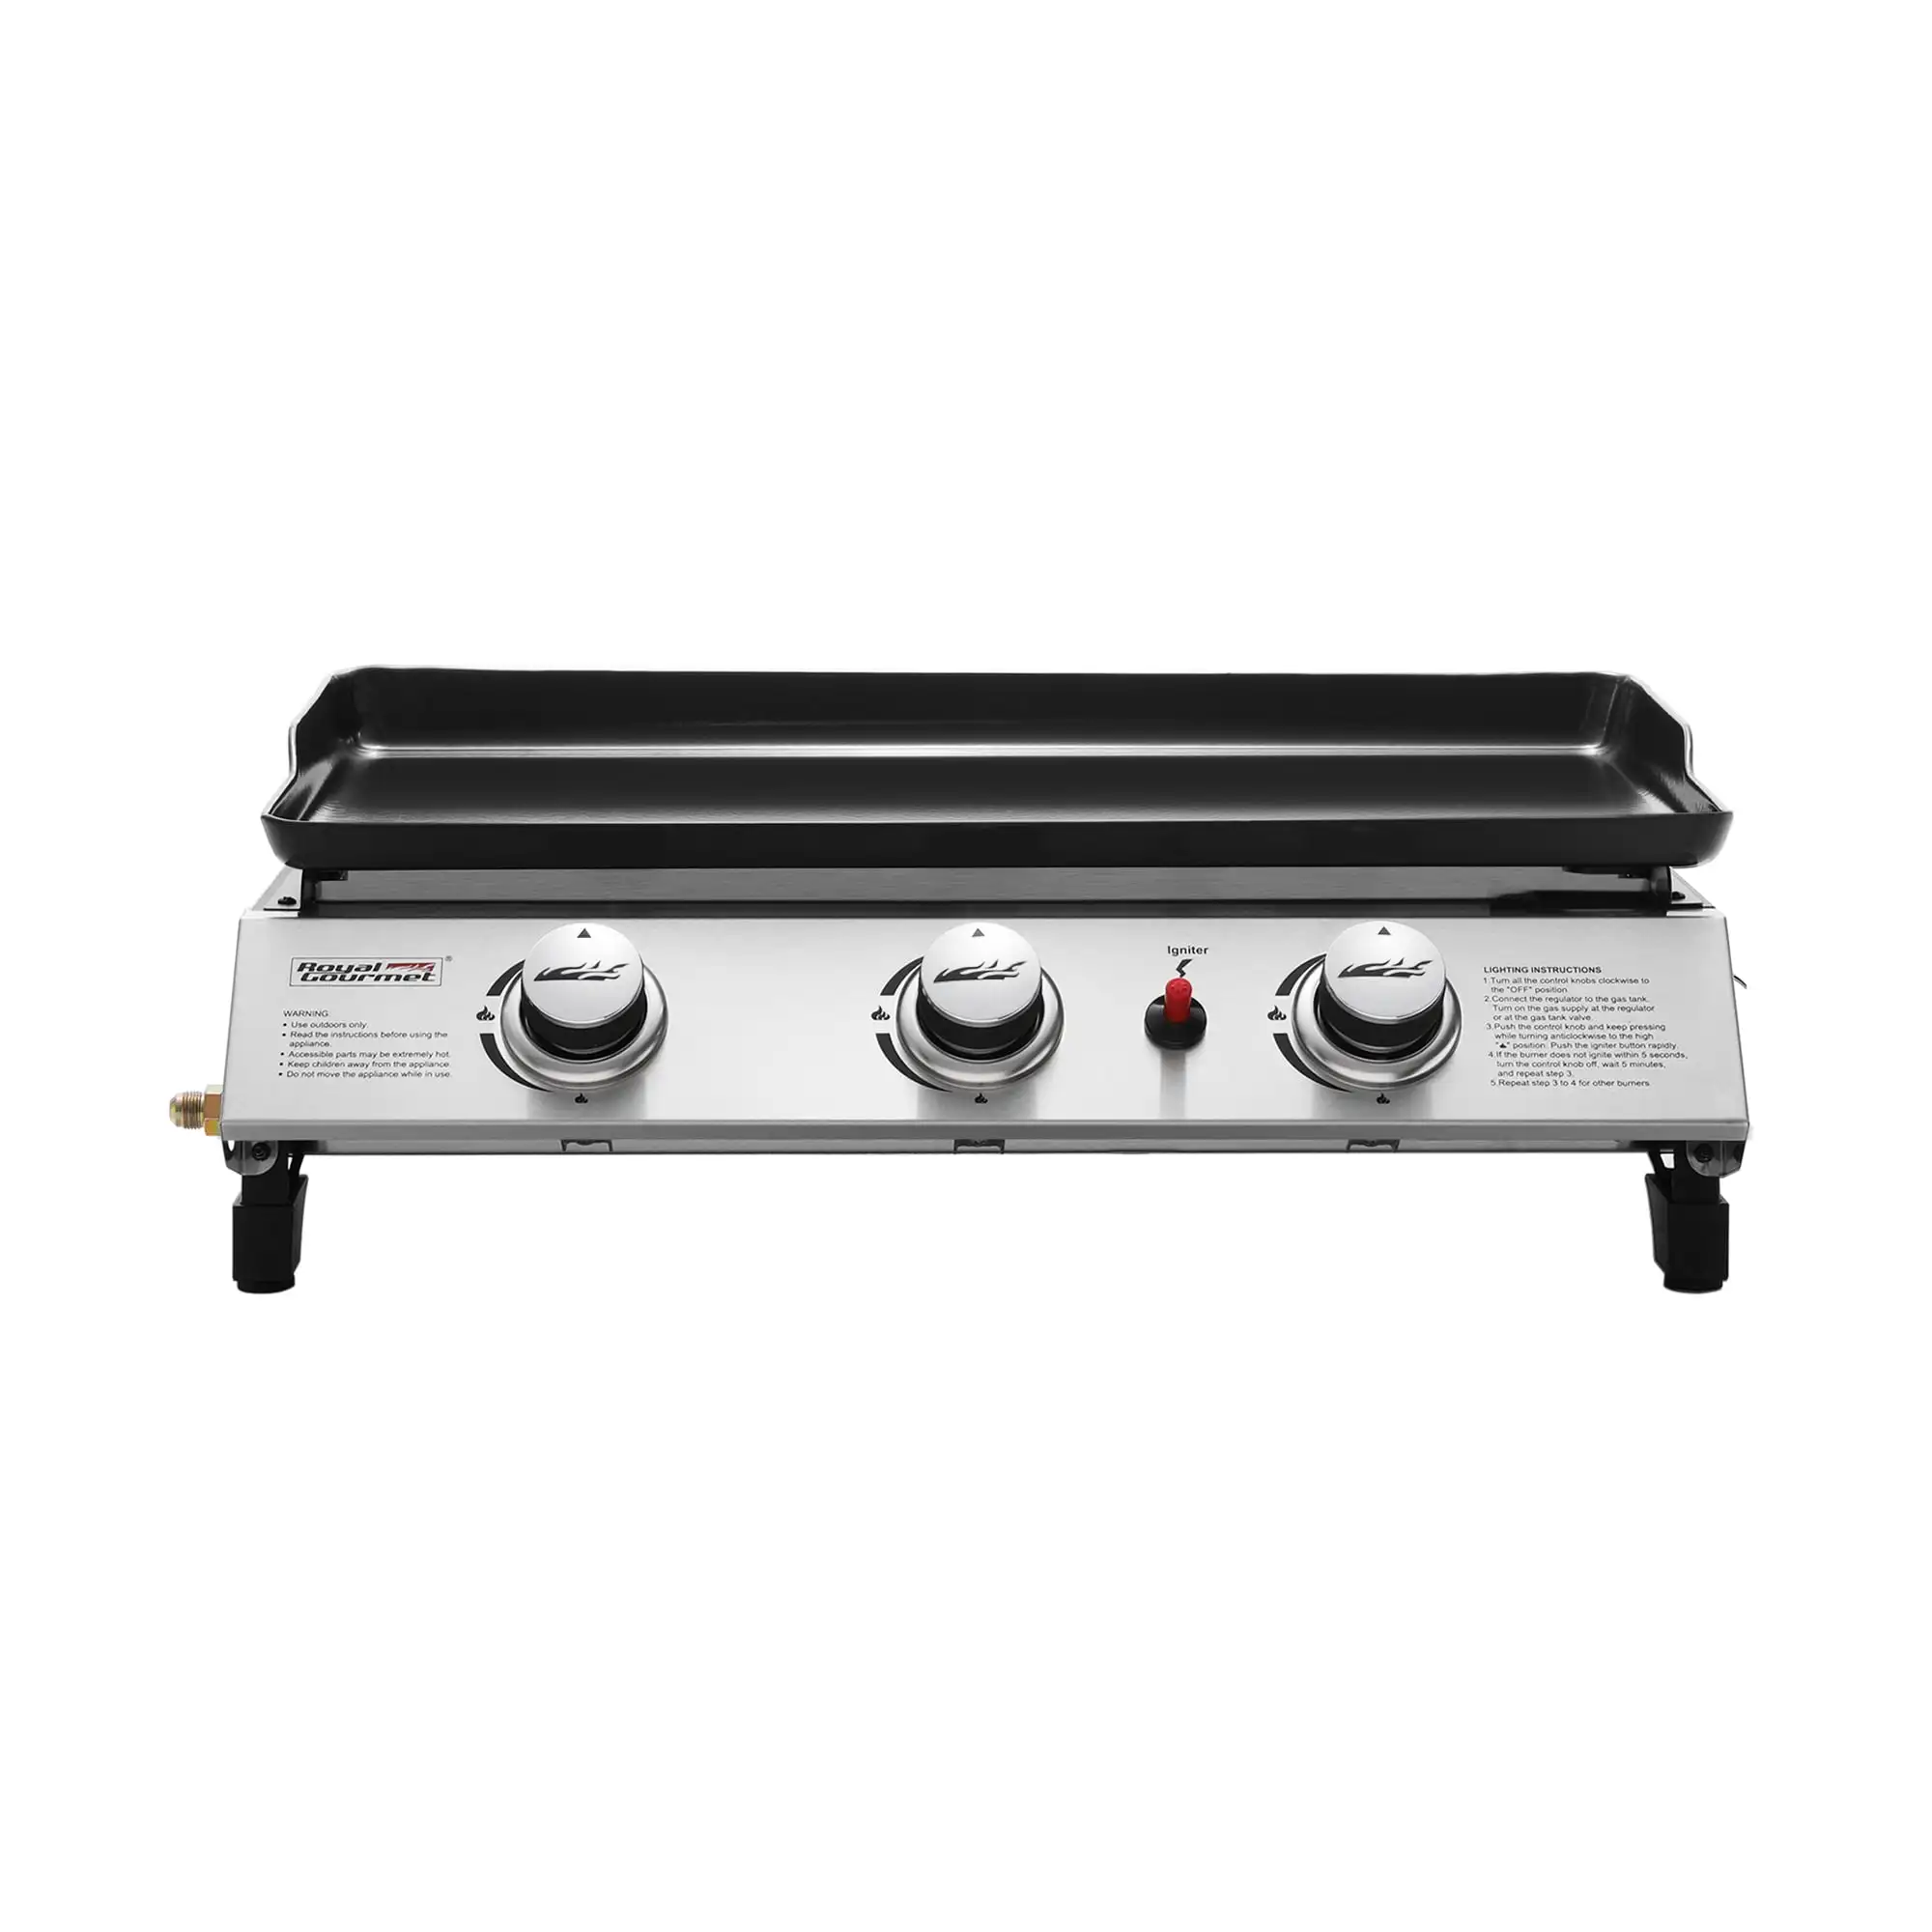 

PD1300 3-Burner 26,400-BTU Portable Gas Grill Griddle, Outdoor Camping, Tailgating